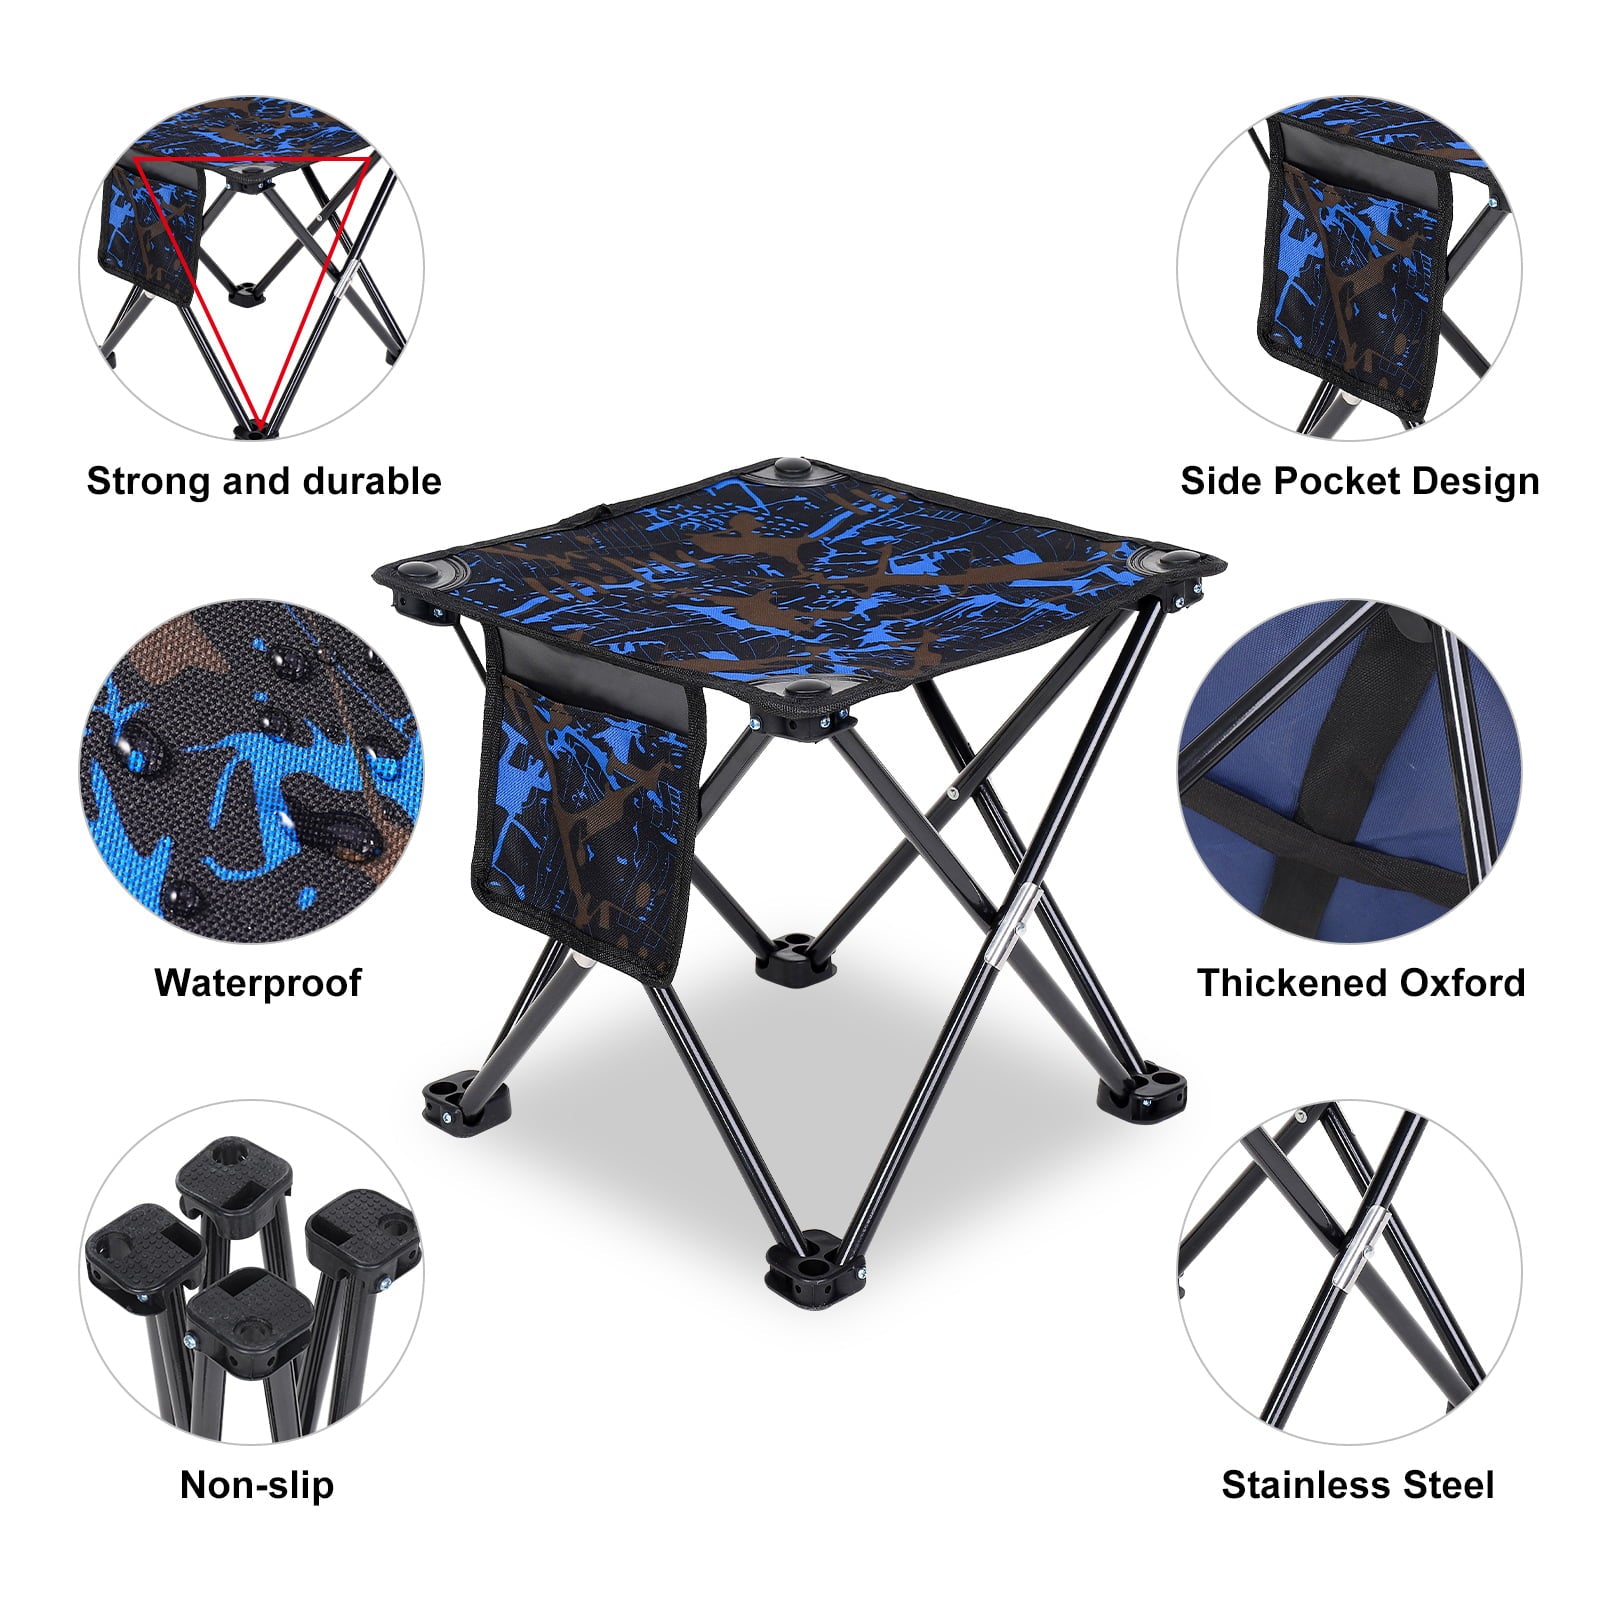 Yaoping Folding Camping Stool, Camouflage Portable Outdoor Camping Chair with Storage Bag, Lightweight Strong Bearing Capacity Chair for Adult Fishing Hiking Gardening